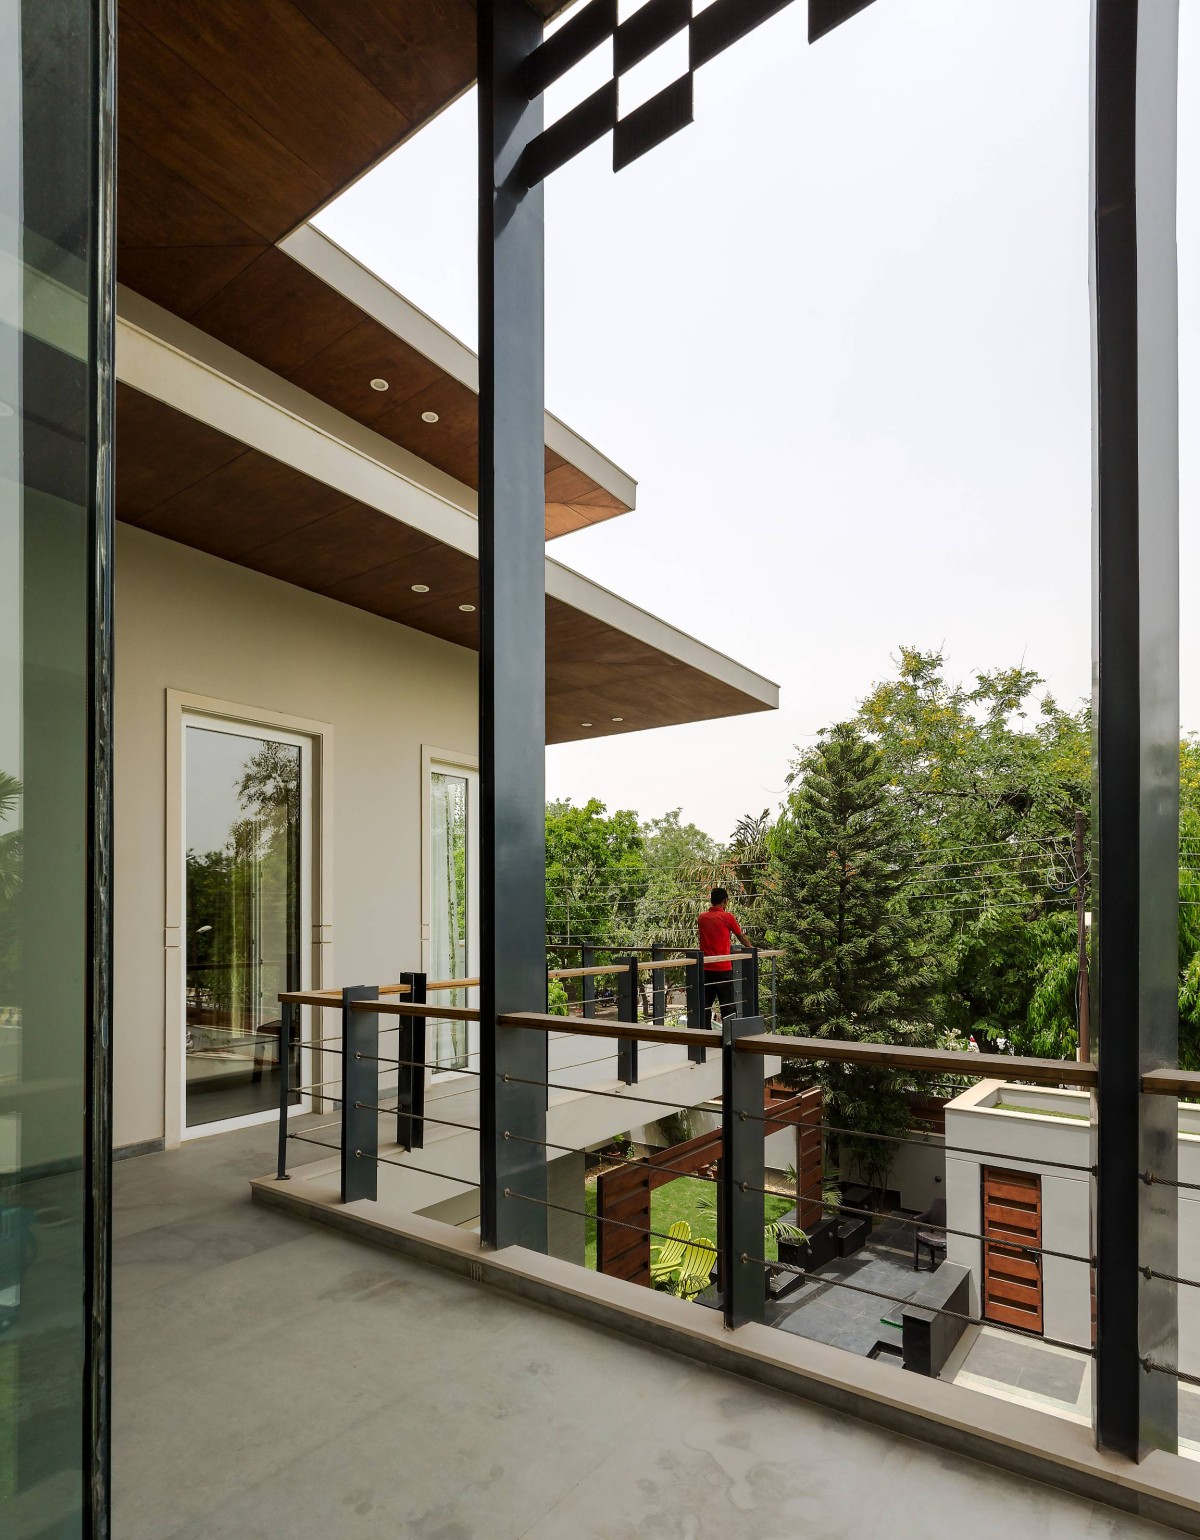 Balcony of The BungaLOW by Anagram Architects